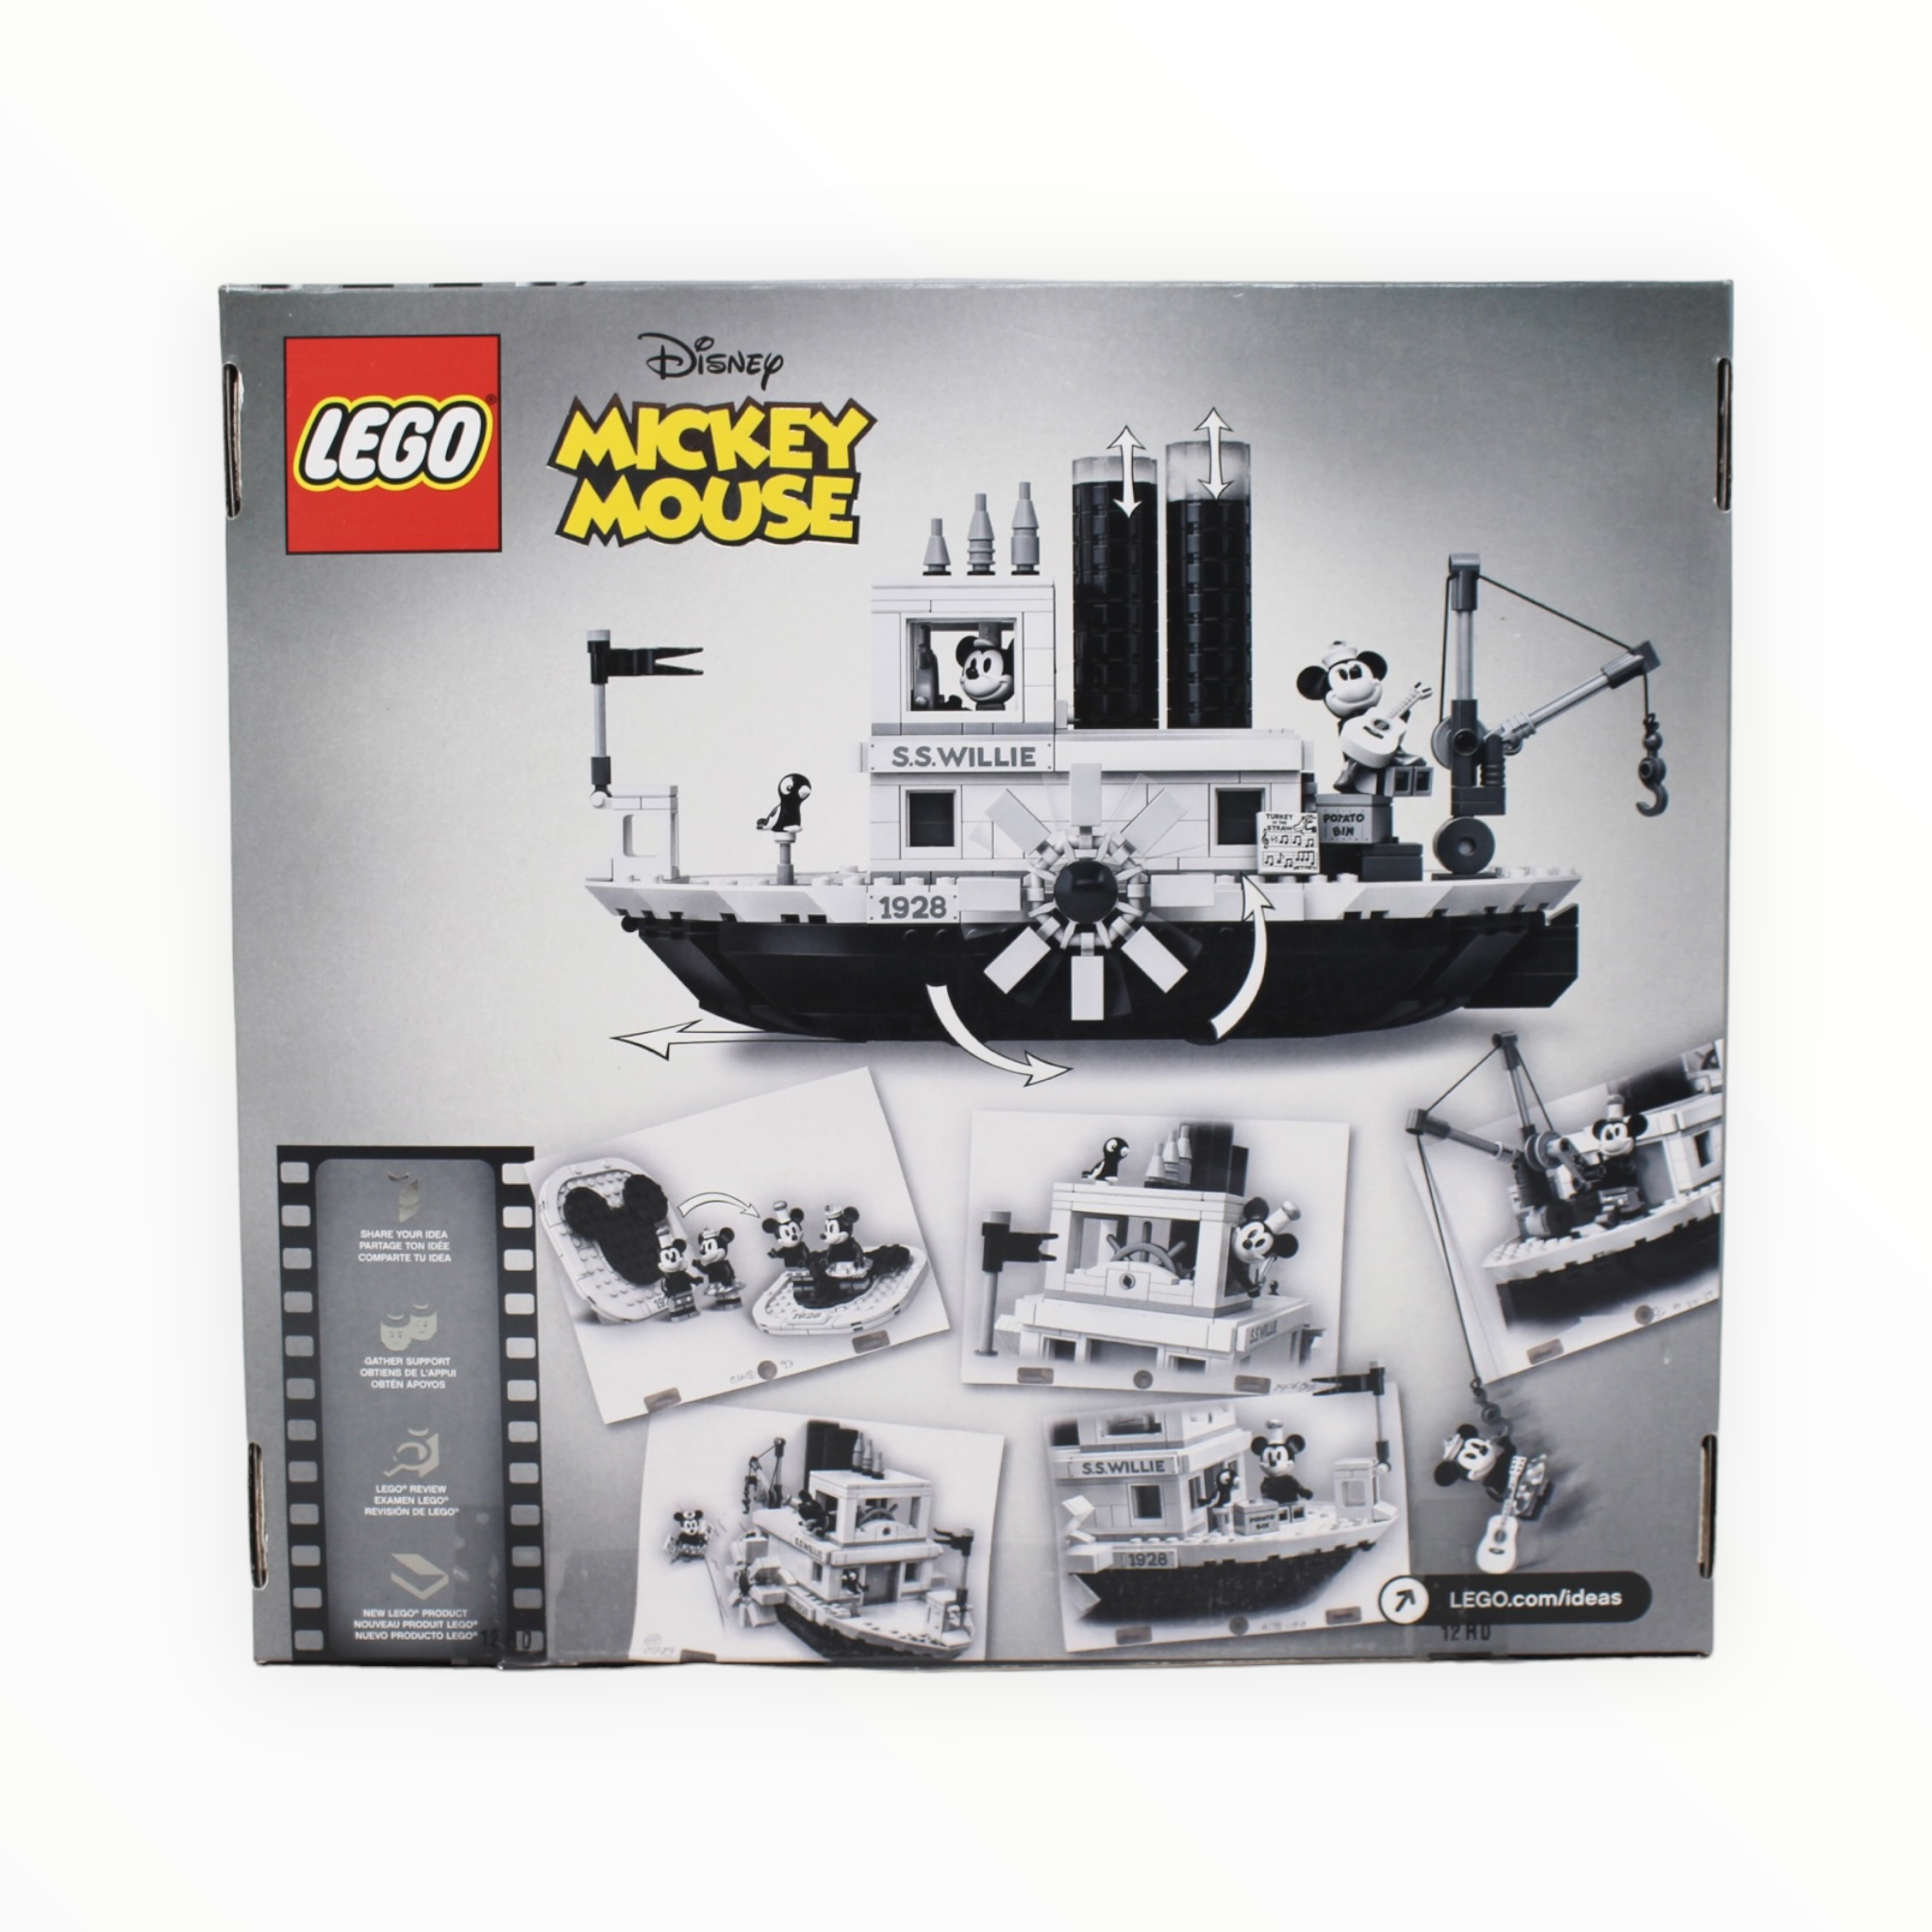 Certified Used Set 21317 LEGO Ideas Steamboat Willie